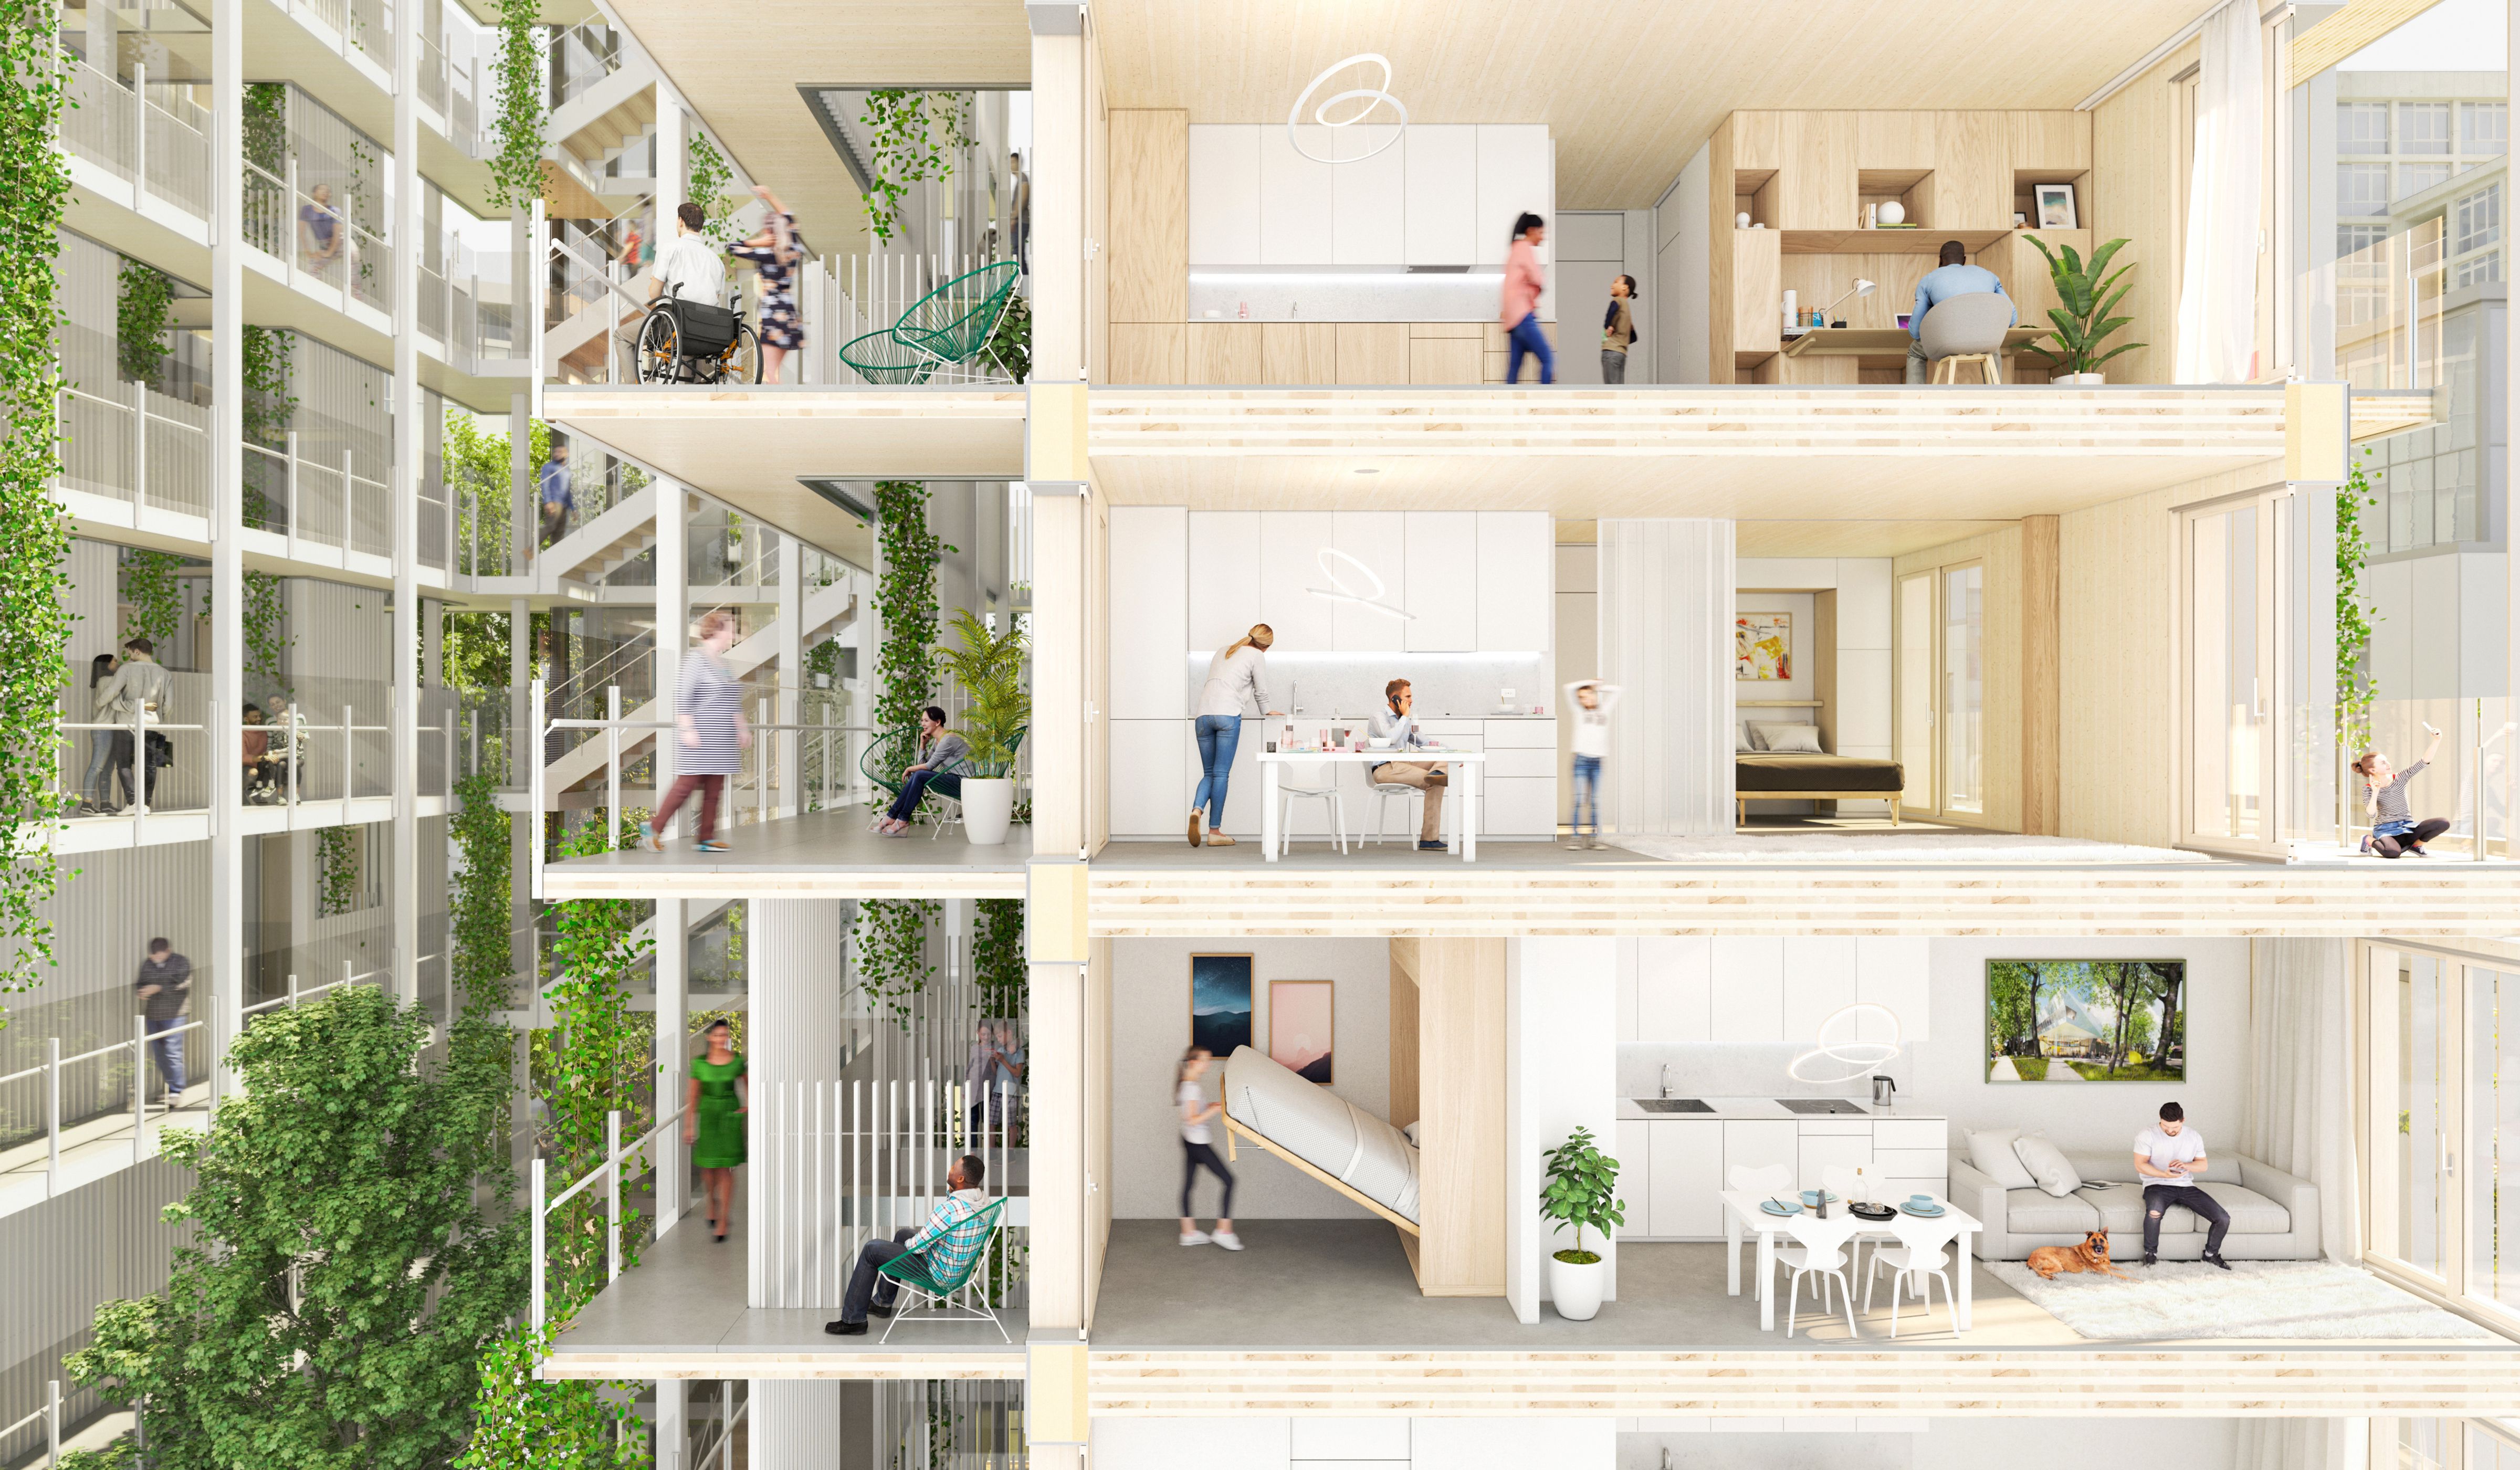 Building a Sustainable Condo Today Involves Designing for the Future